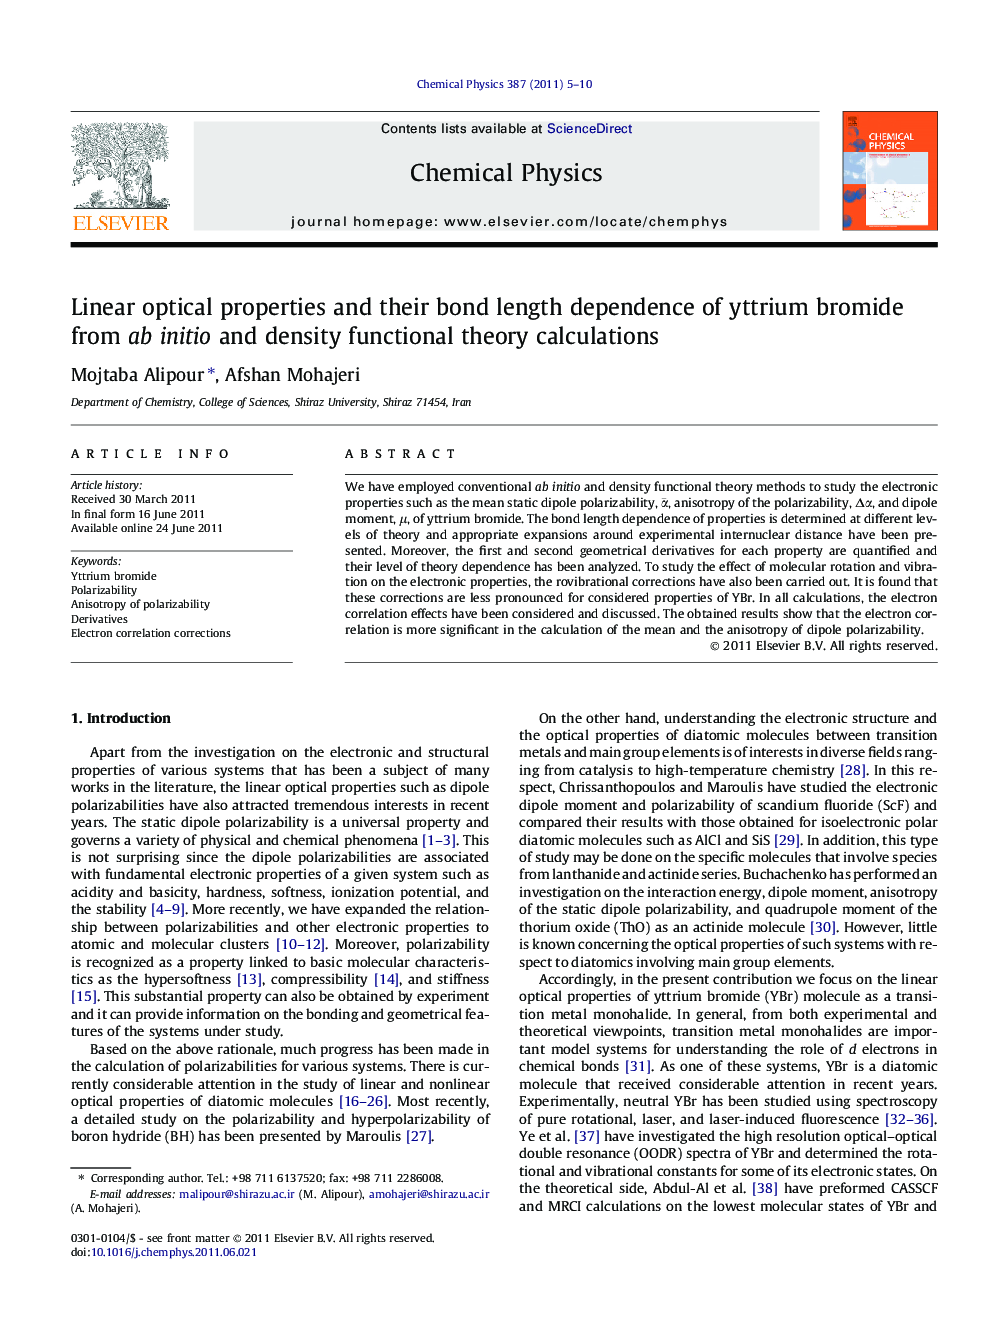 Linear optical properties and their bond length dependence of yttrium bromide from ab initio and density functional theory calculations